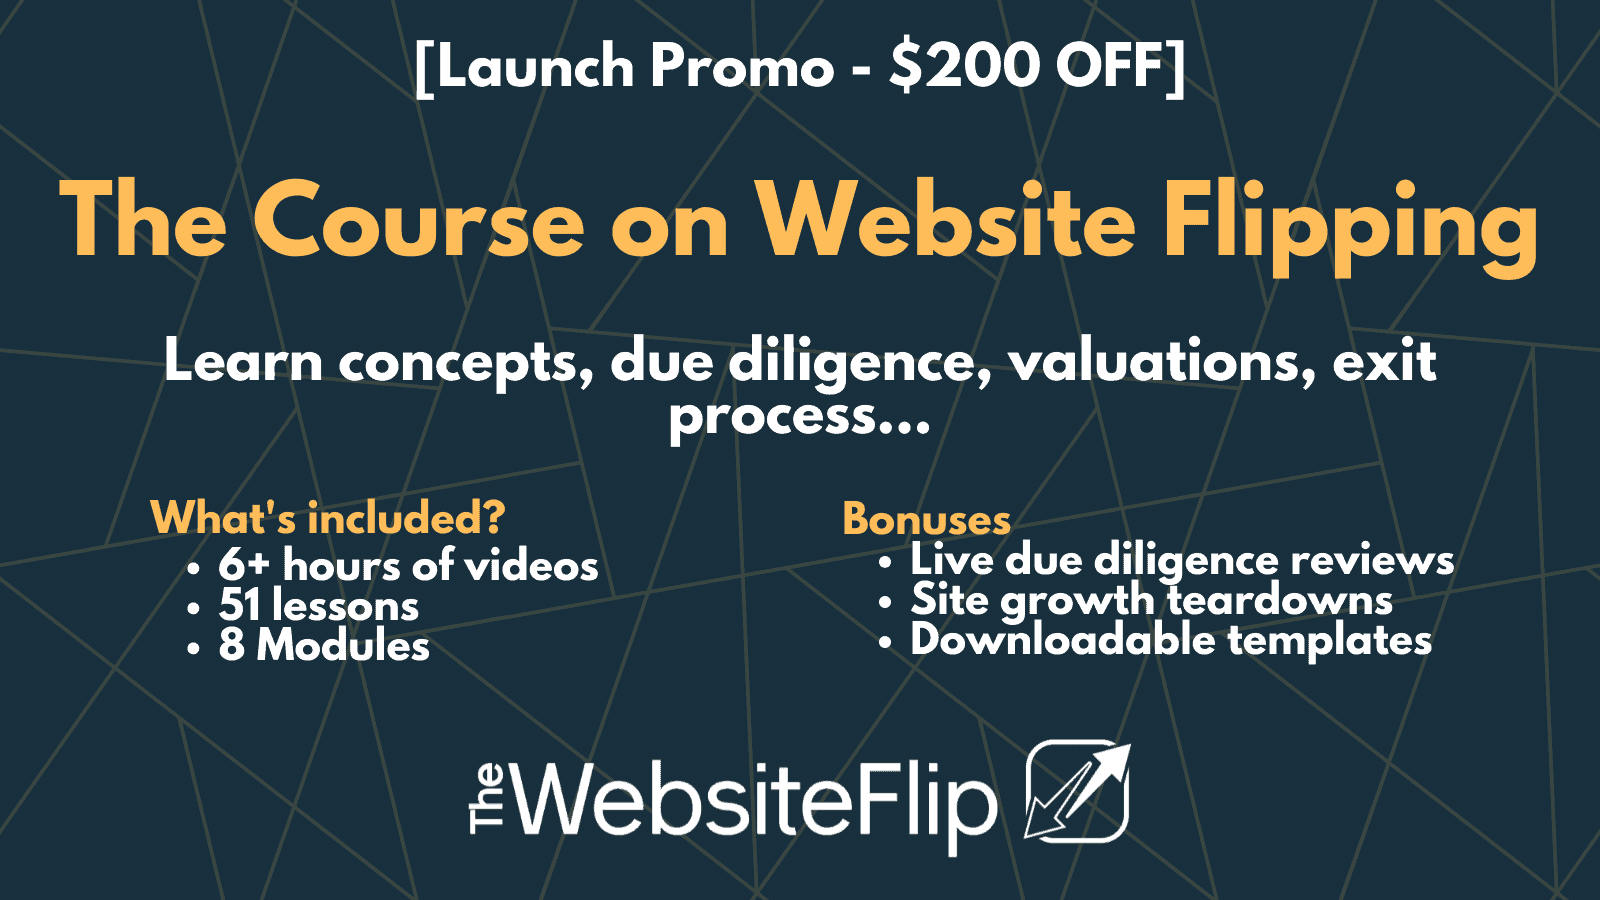 The Course on Website Flipping - Launch Promo